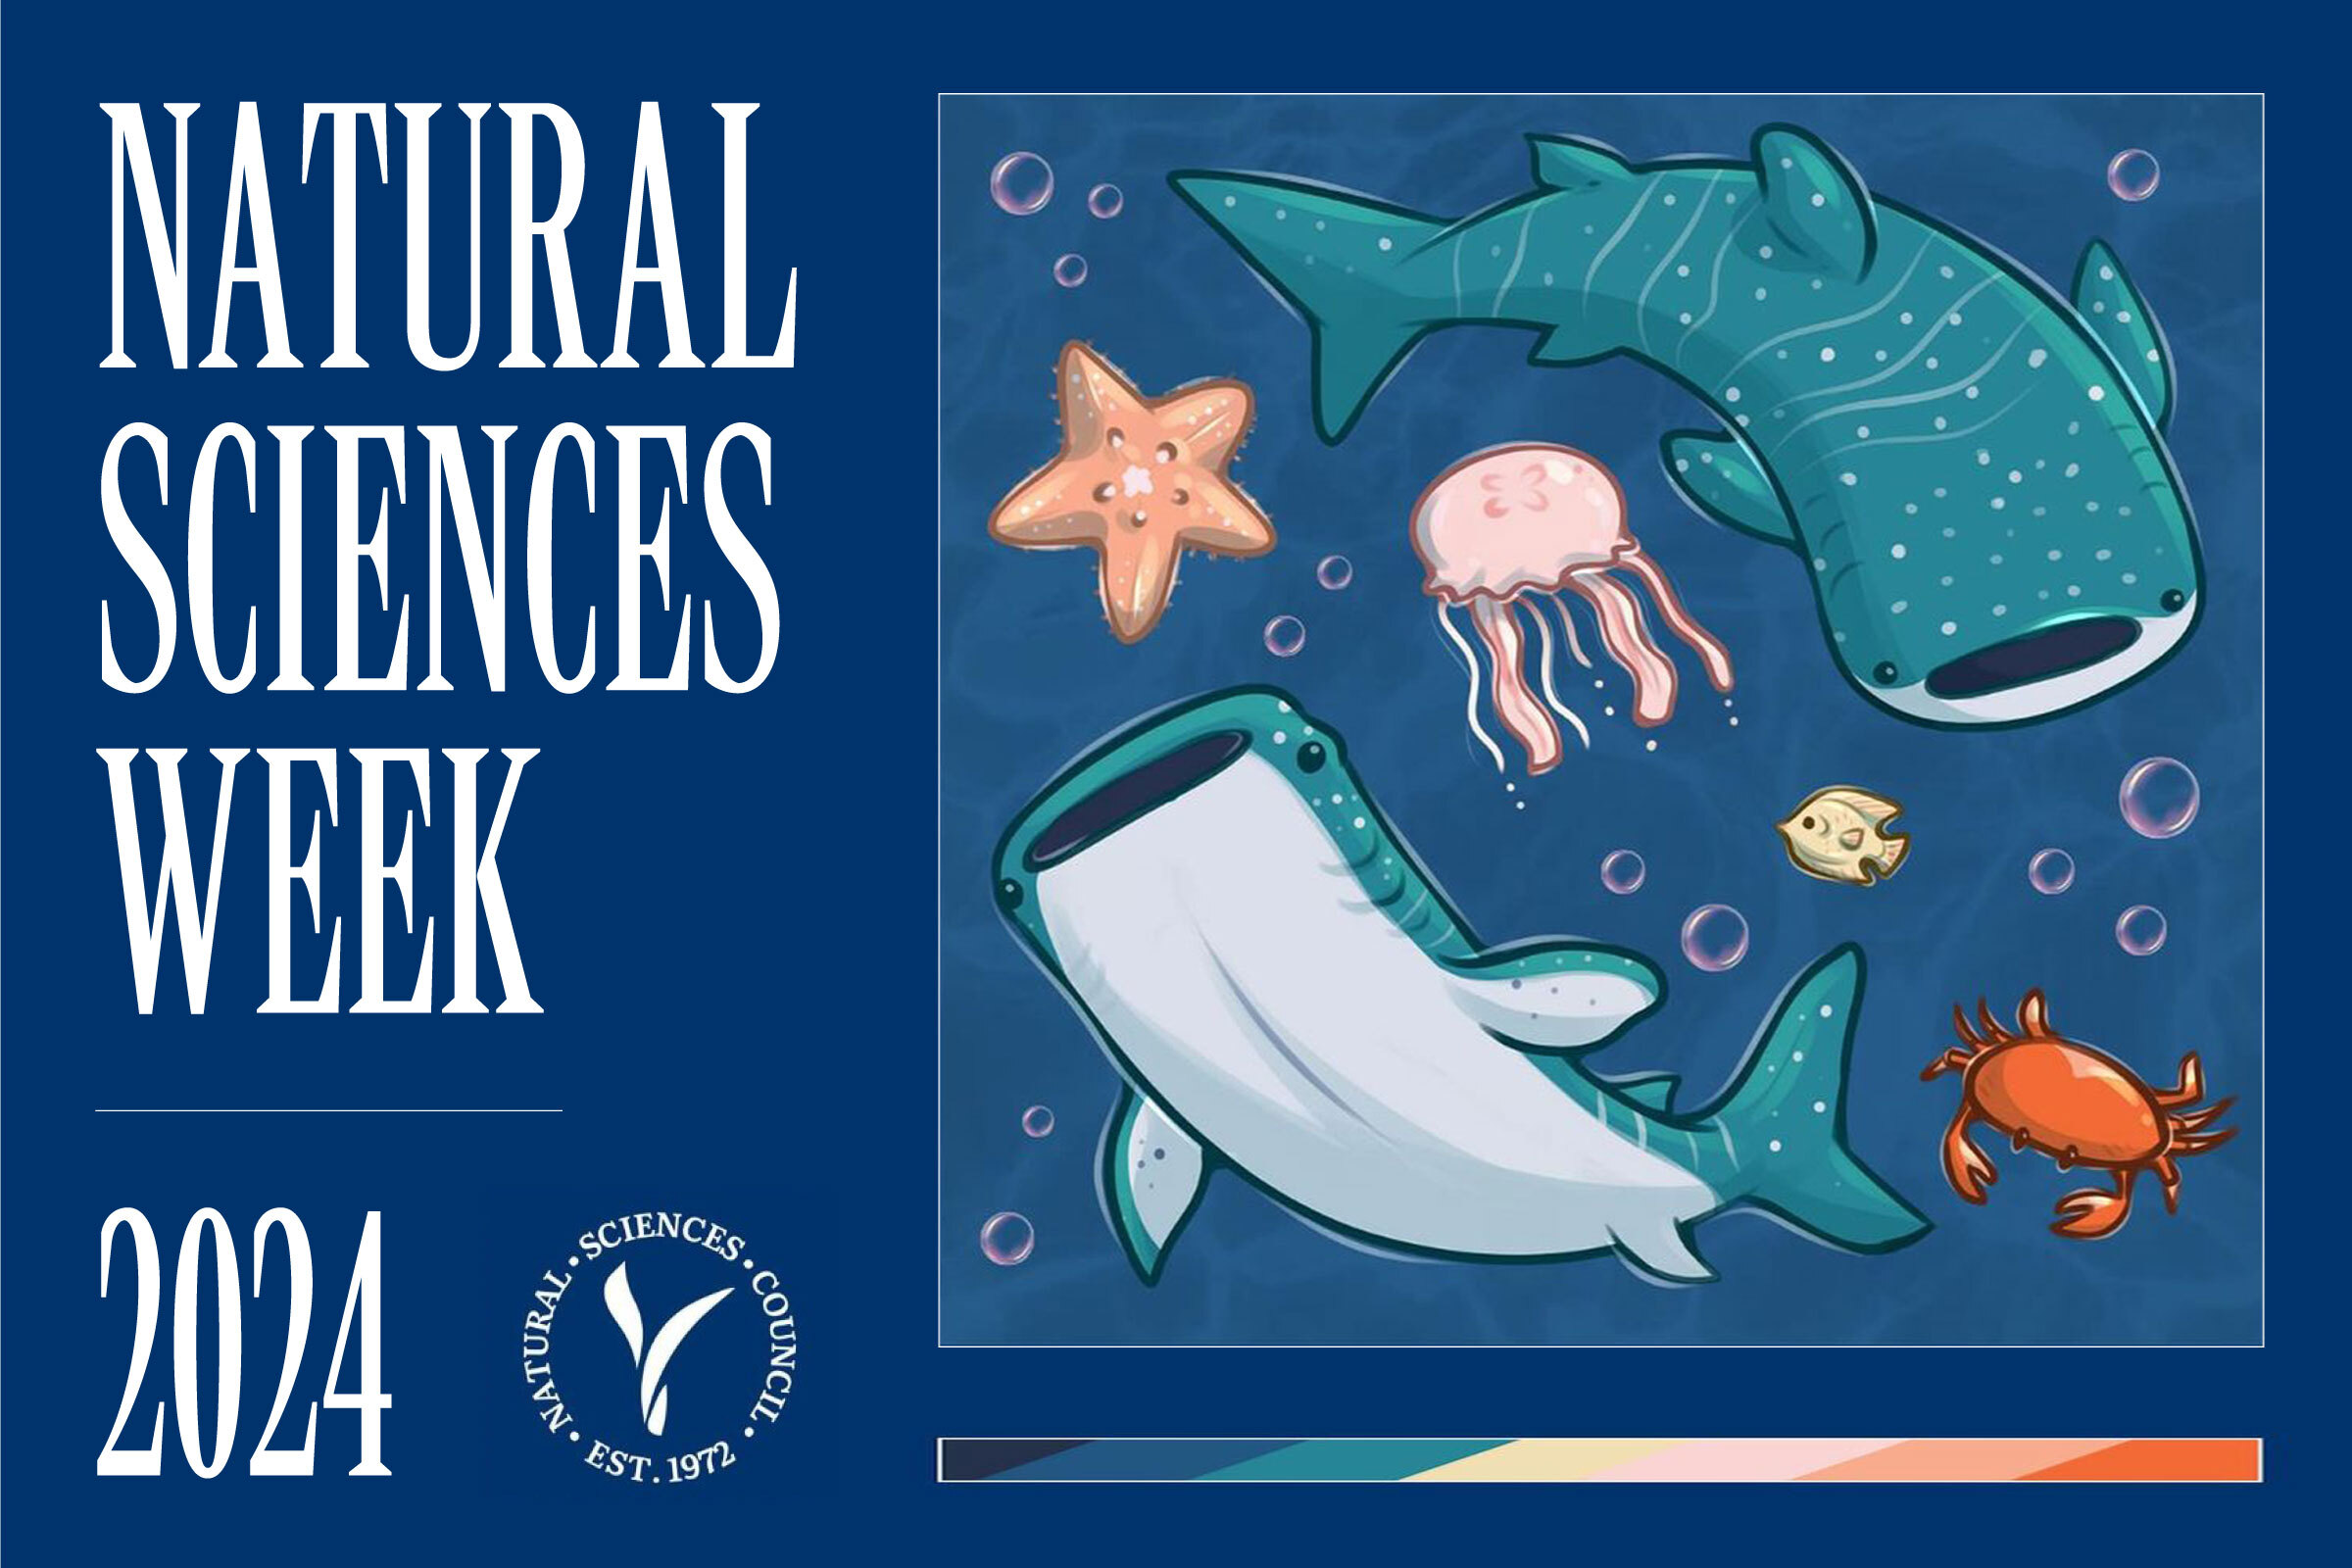 Natural Sciences Week 2024. Drawings of sea creatures appears on the right.